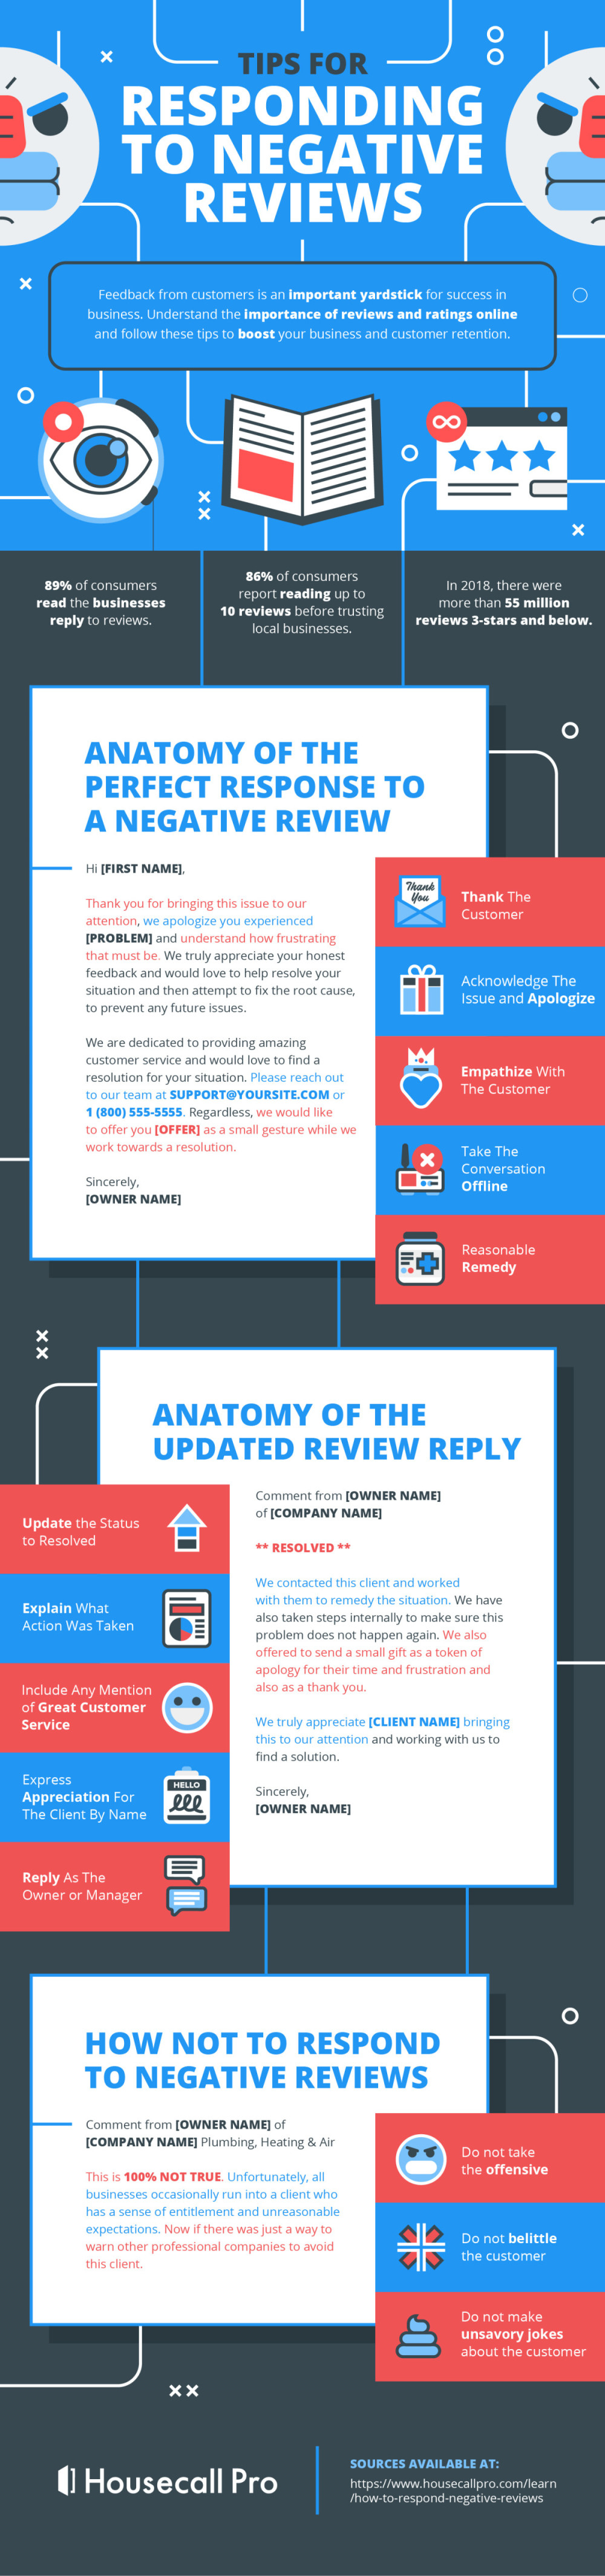 reasons to respond to negative reviews with templates of negative review response anatomy.